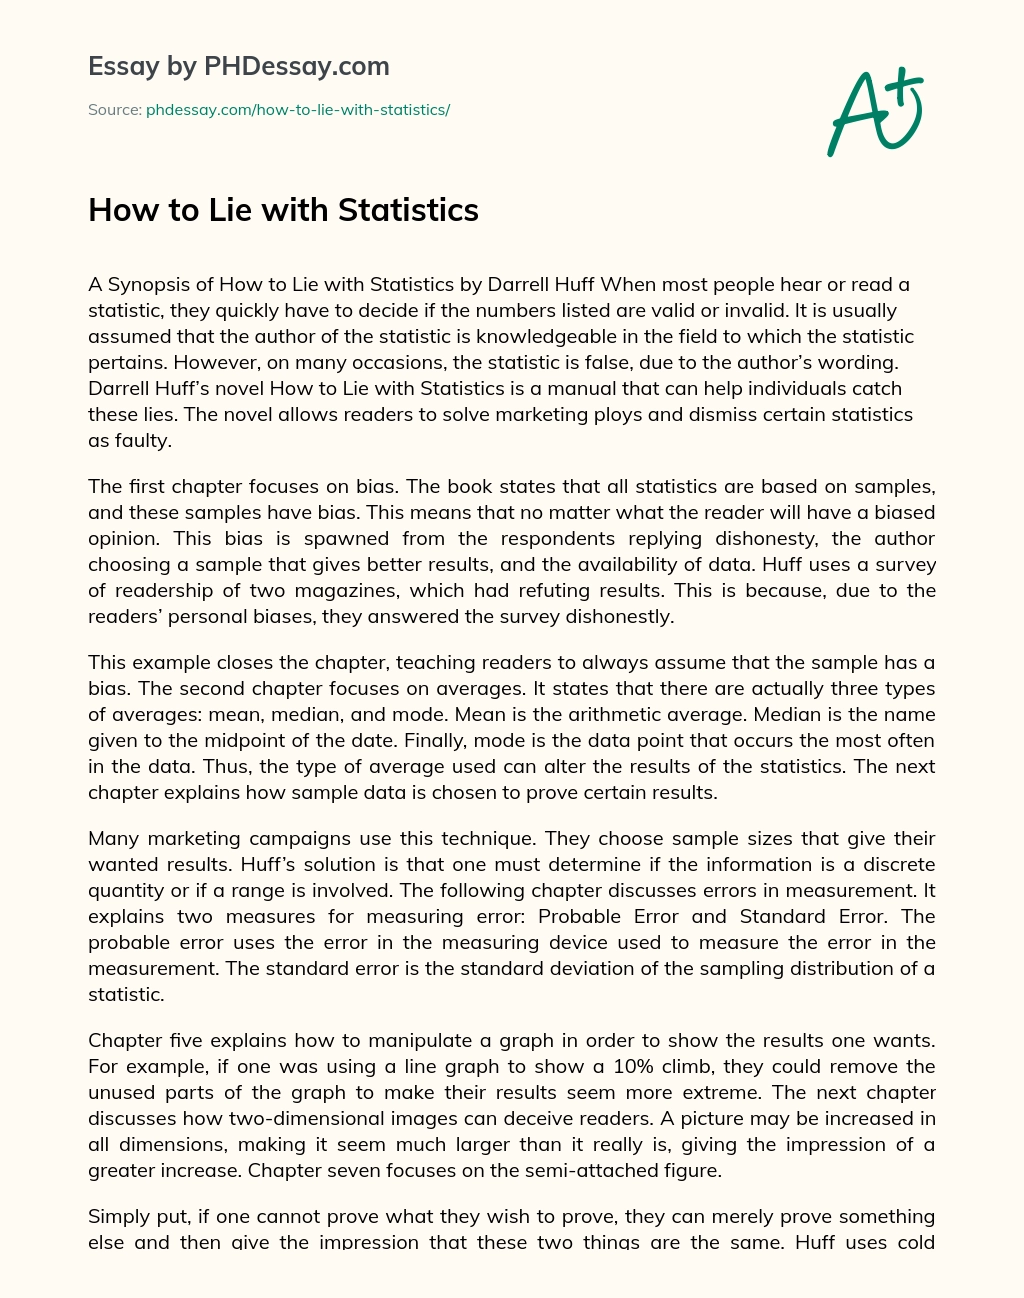 How to Lie with Statistics essay